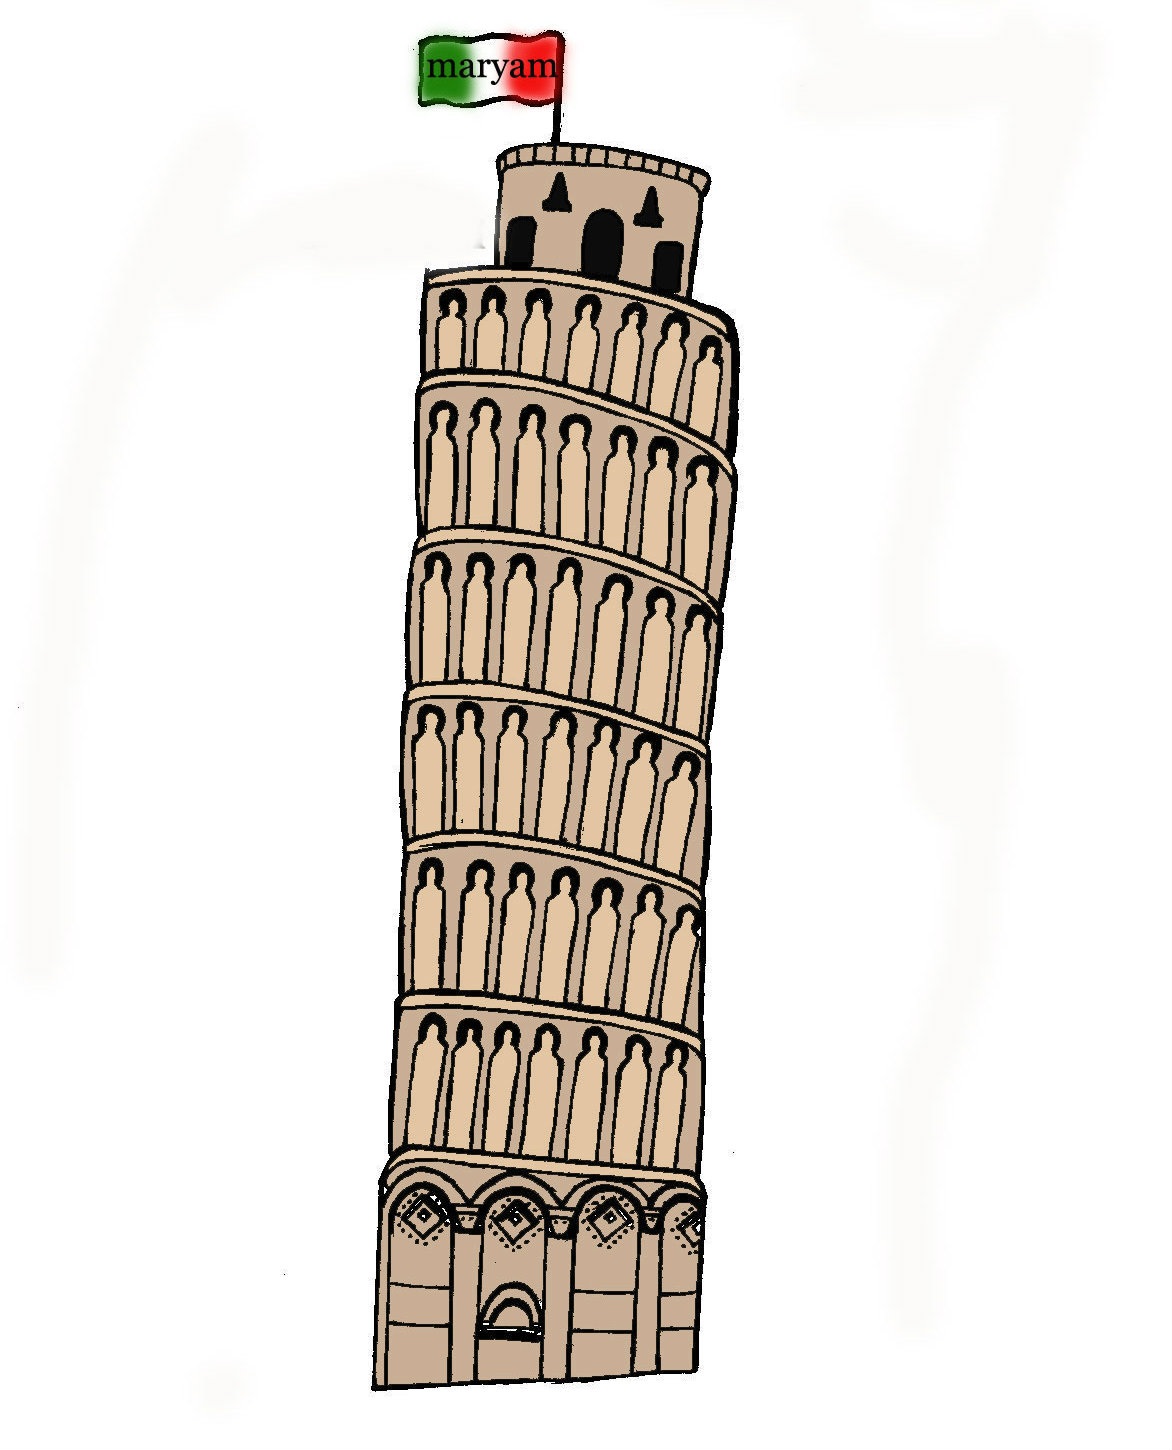 Leaning Tower Of Pisa Drawing - ClipArt Best